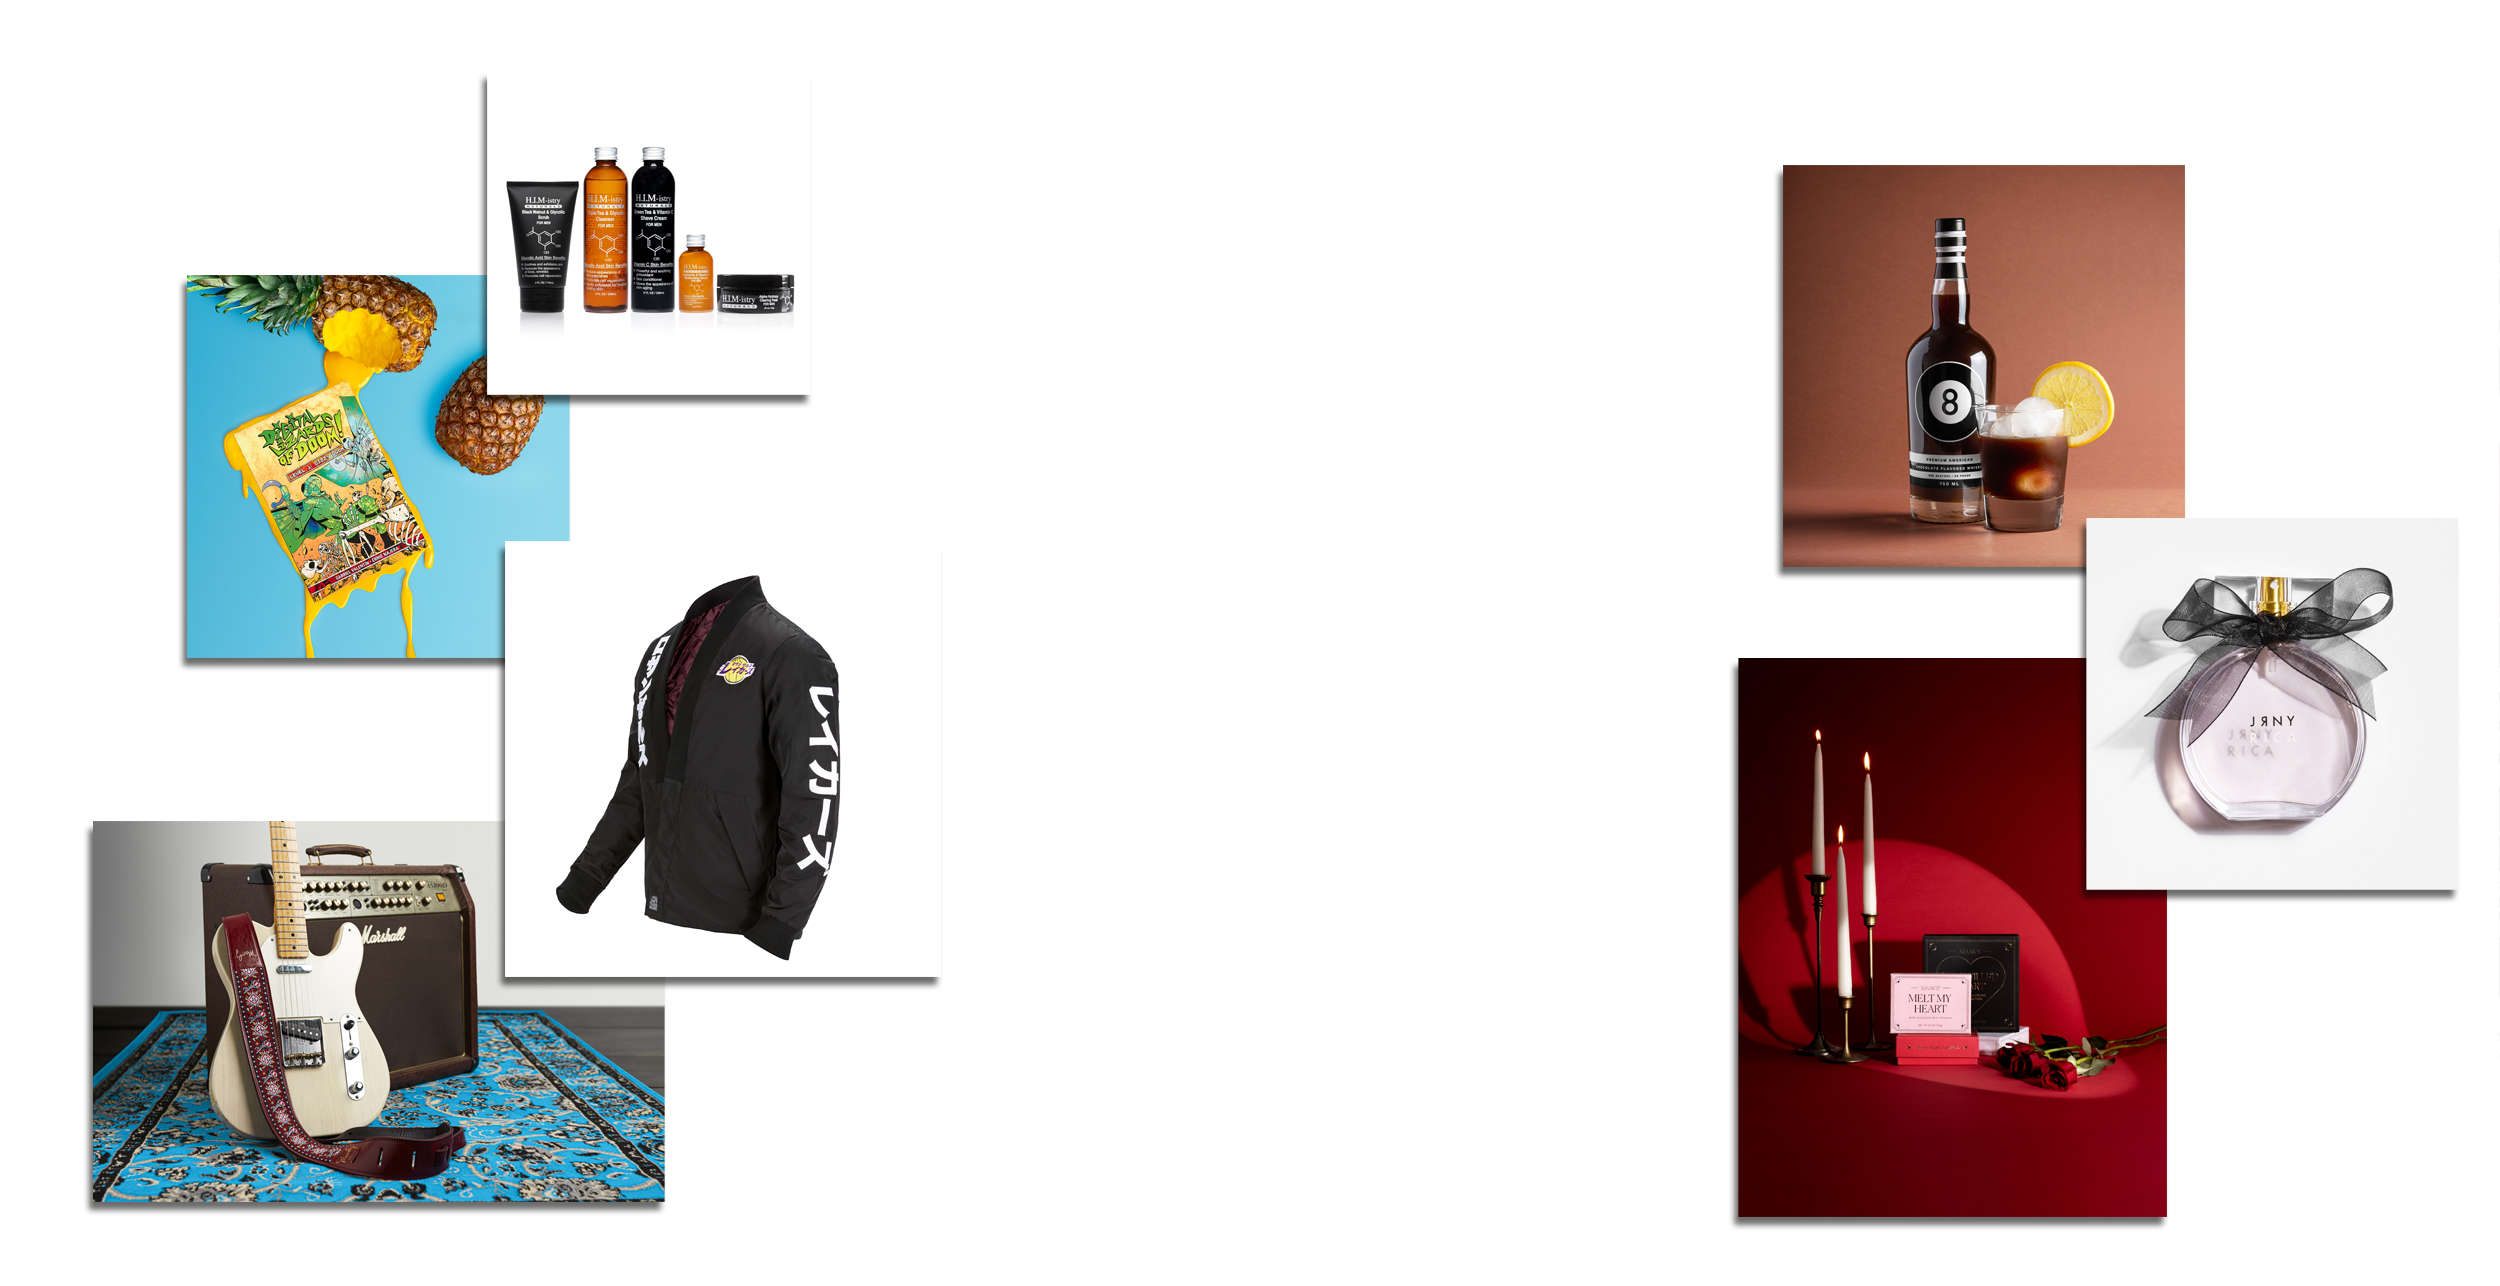 A collage of lifestyle and luxury products presented in an aesthetically pleasing and artistic arrangement, including beverages, fashion, and fragrance.